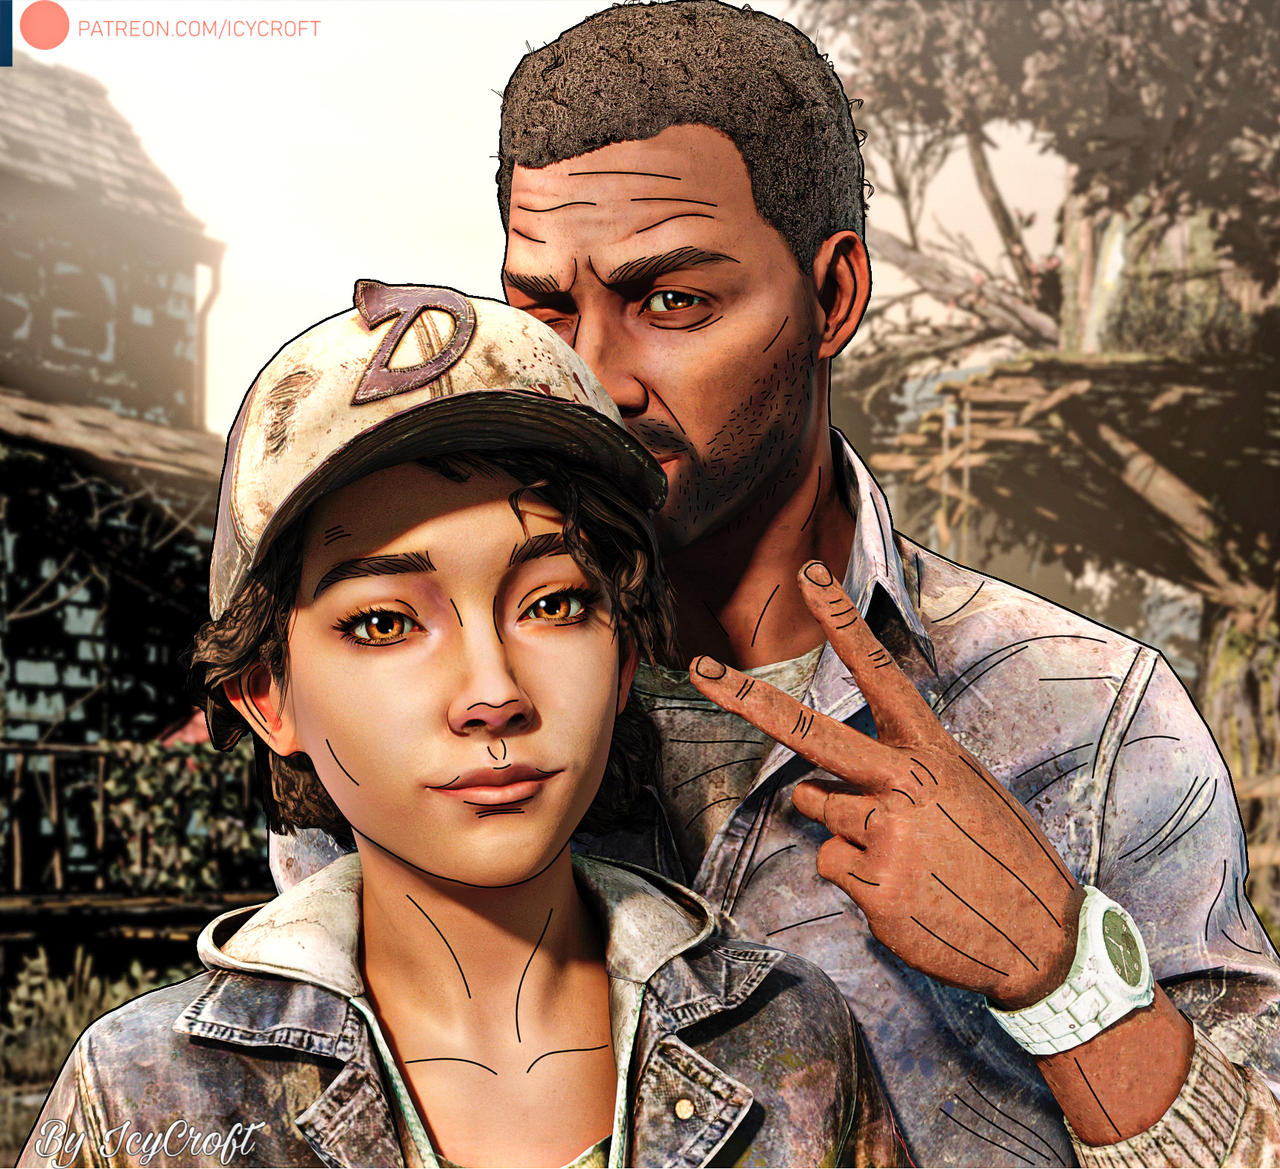 The Walking Dead Game - Clementine and Lee by ICYCROFT on DeviantArt